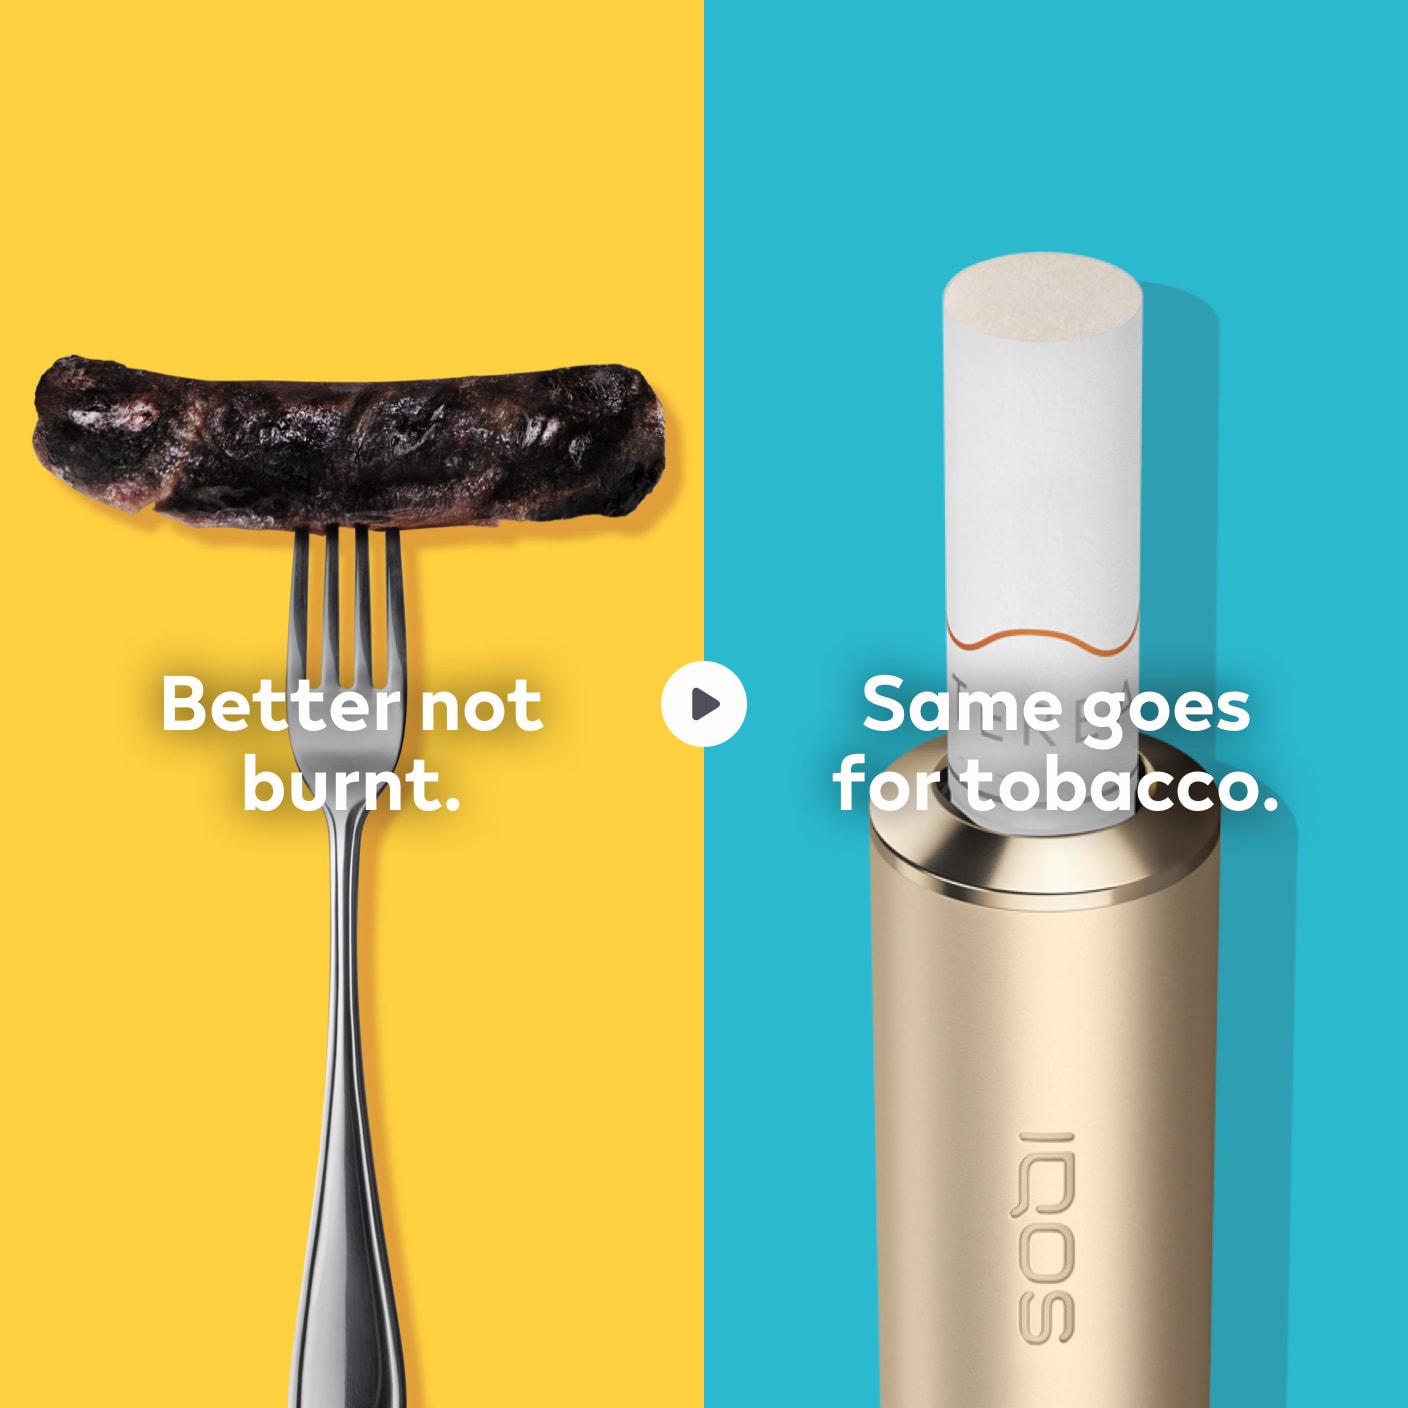 Burnt sausage on a fork compared to IQOS TEREA stick in an IQOS ILUMA holder.